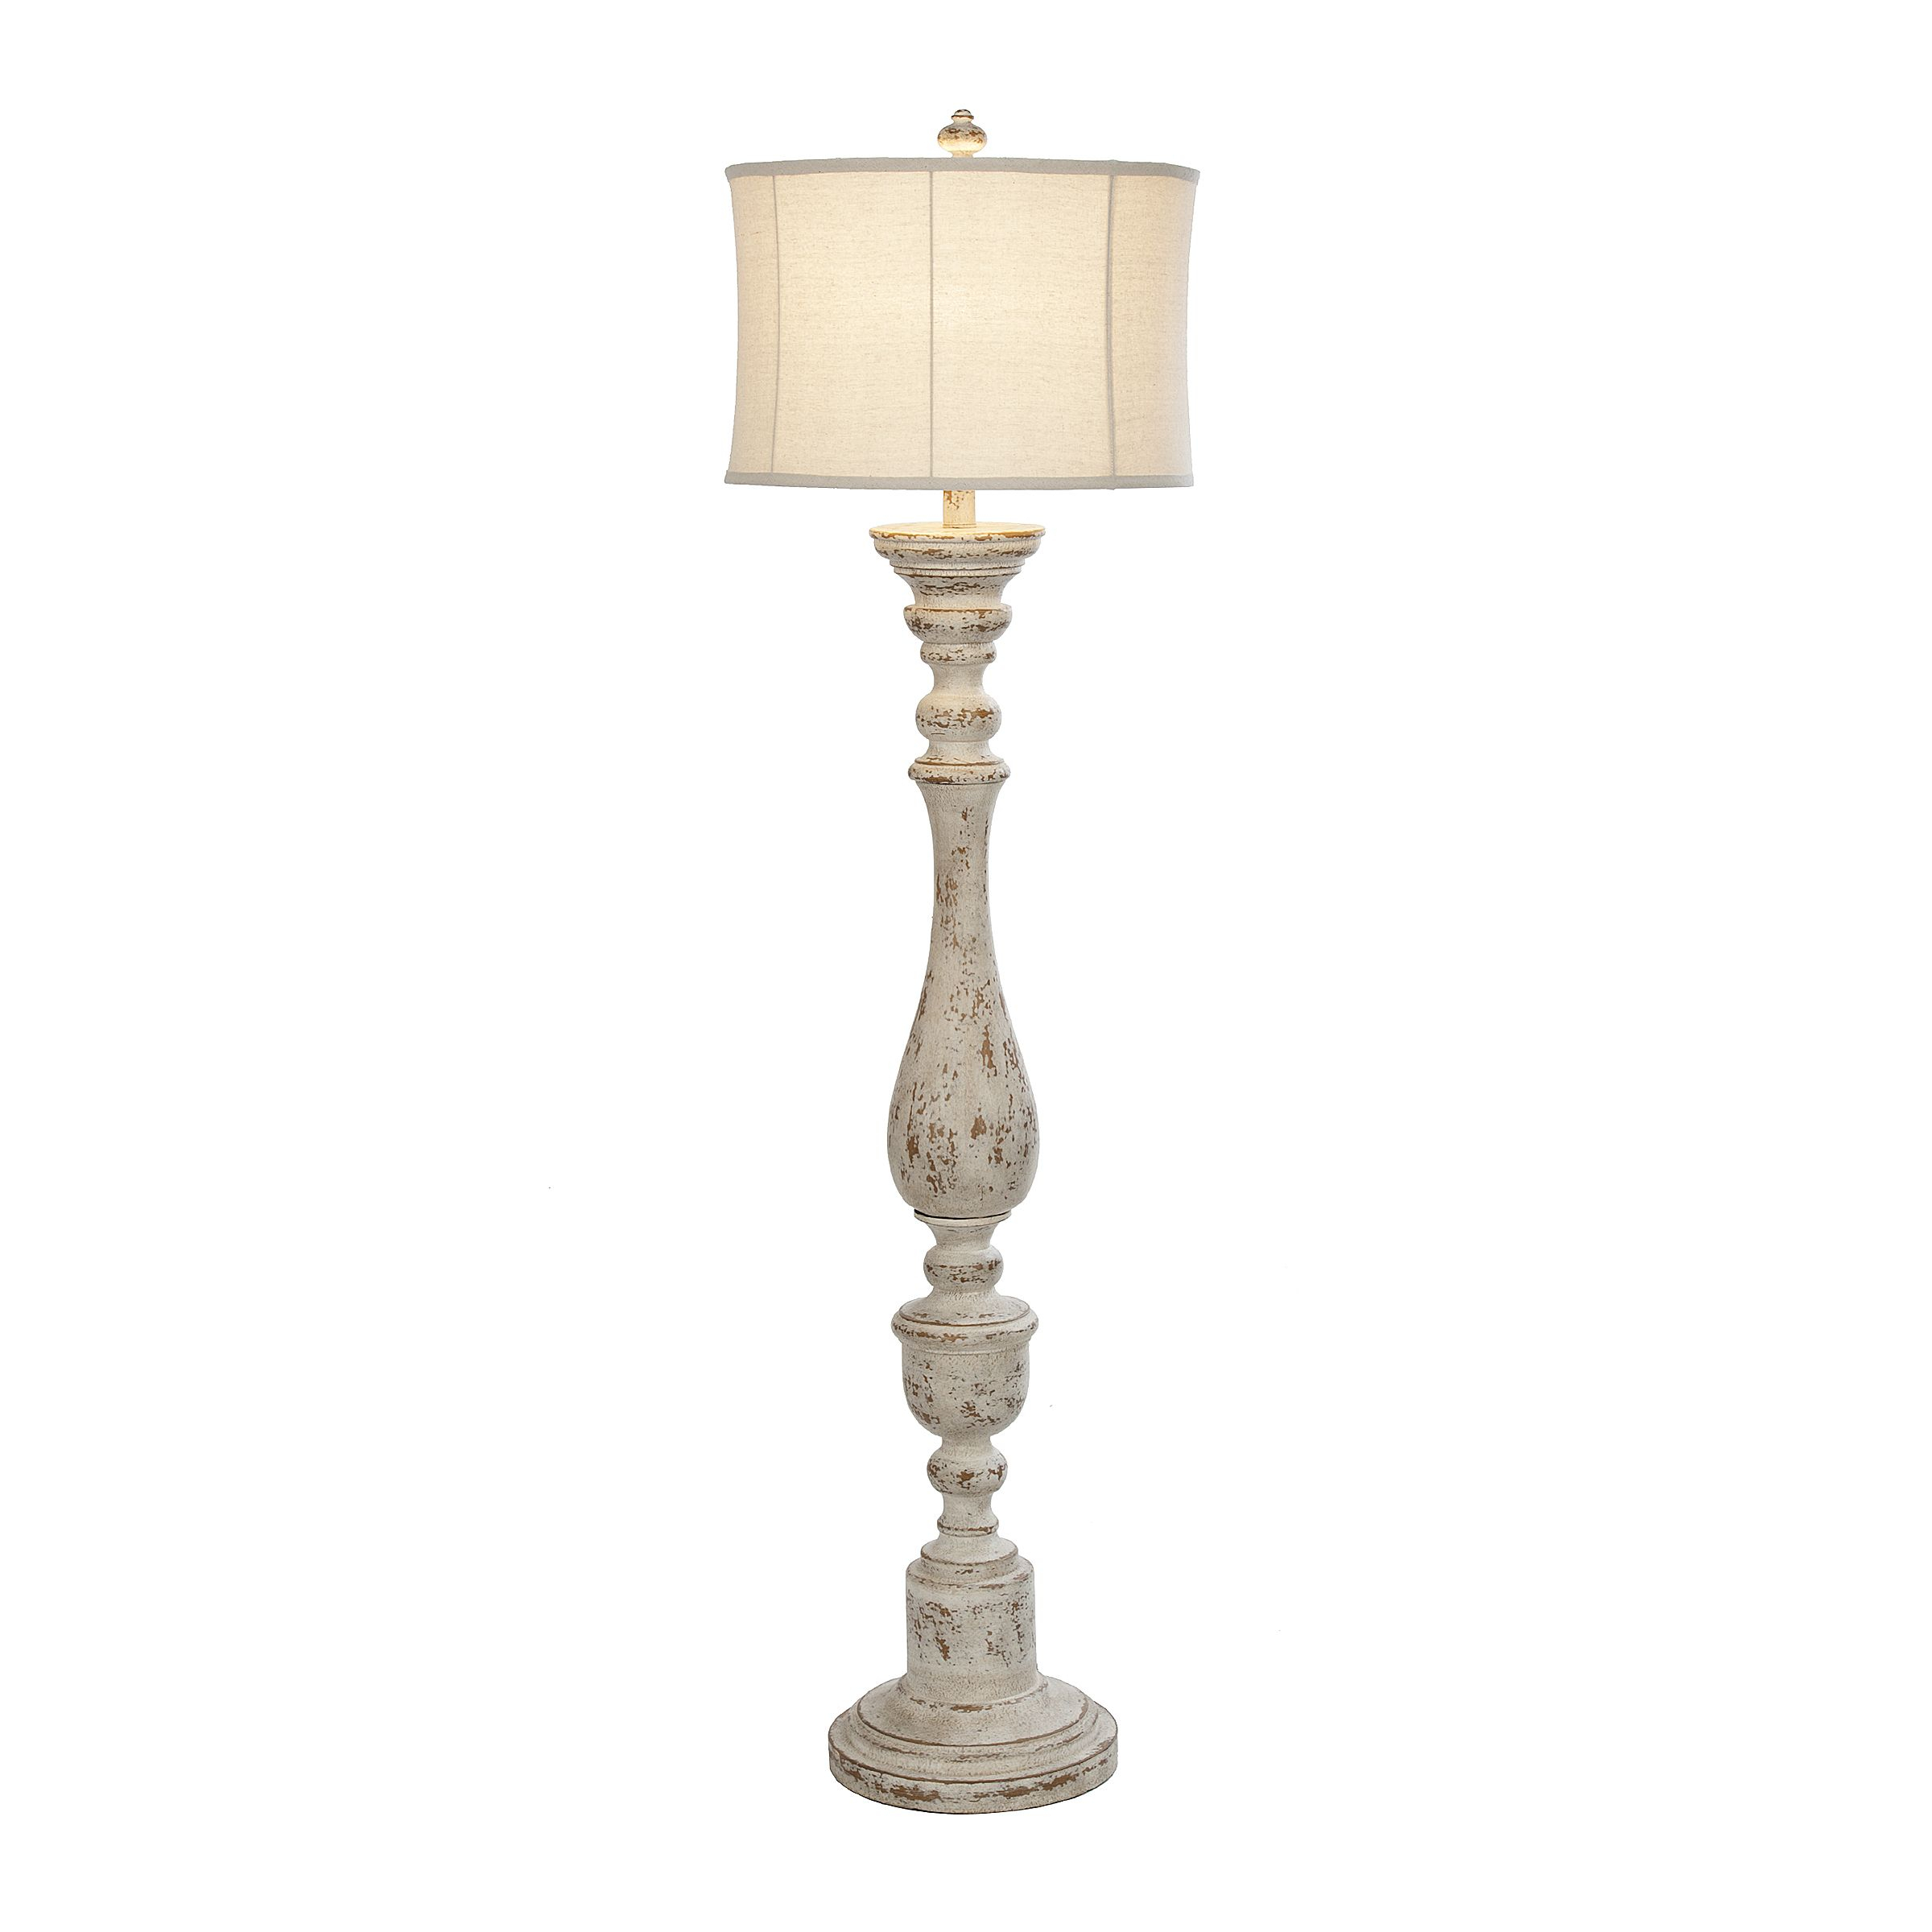 Product Details Distressed Cream Spindle Floor Lamp In 2019 throughout proportions 2400 X 2400